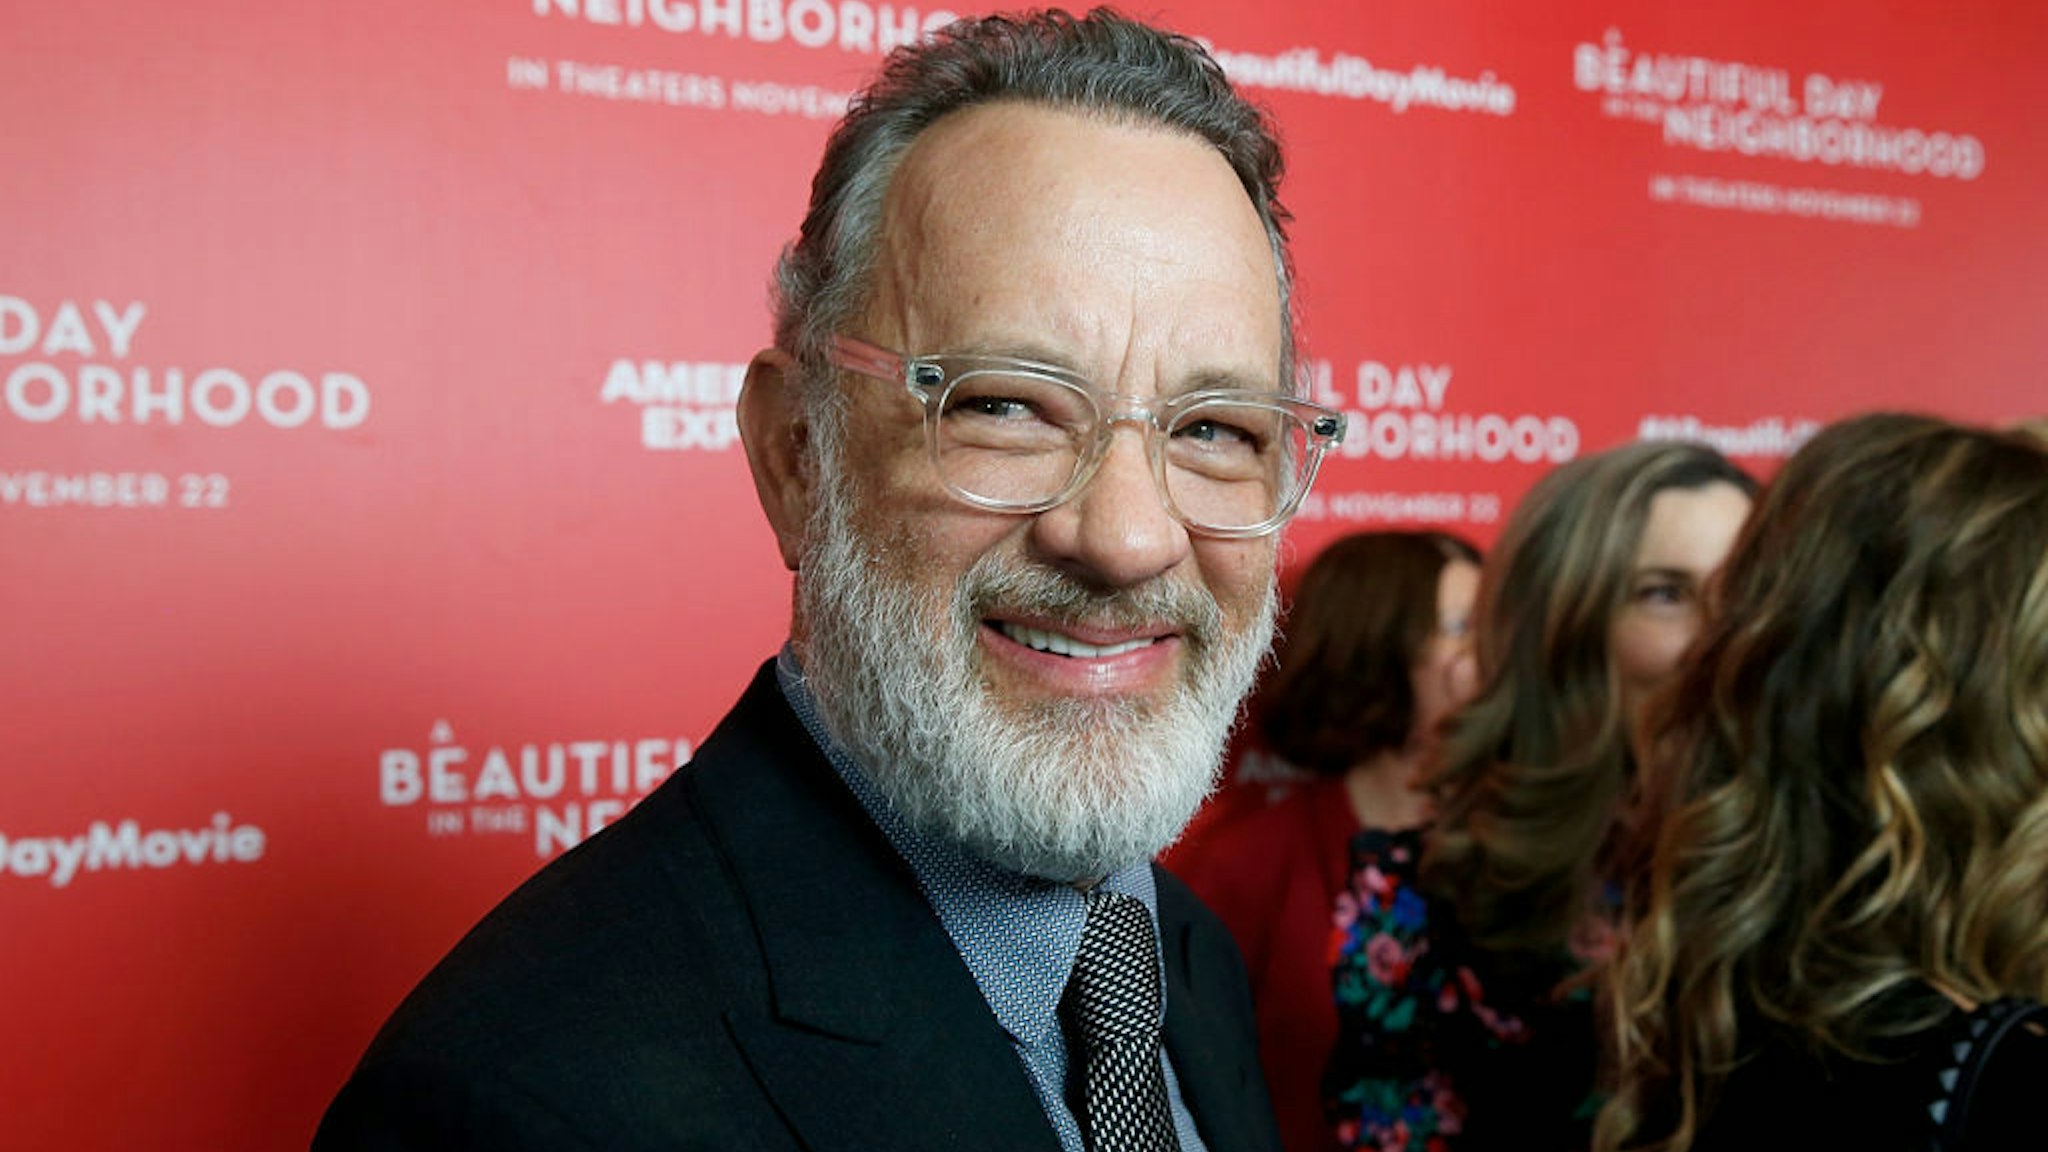 Tom Hanks attends "A Beautiful Day In The Neighborhood" New York Screening at Henry R. Luce Auditorium at Brookfield Place on November 17, 2019 in New York City. (Photo by Dominik Bindl/FilmMagic)